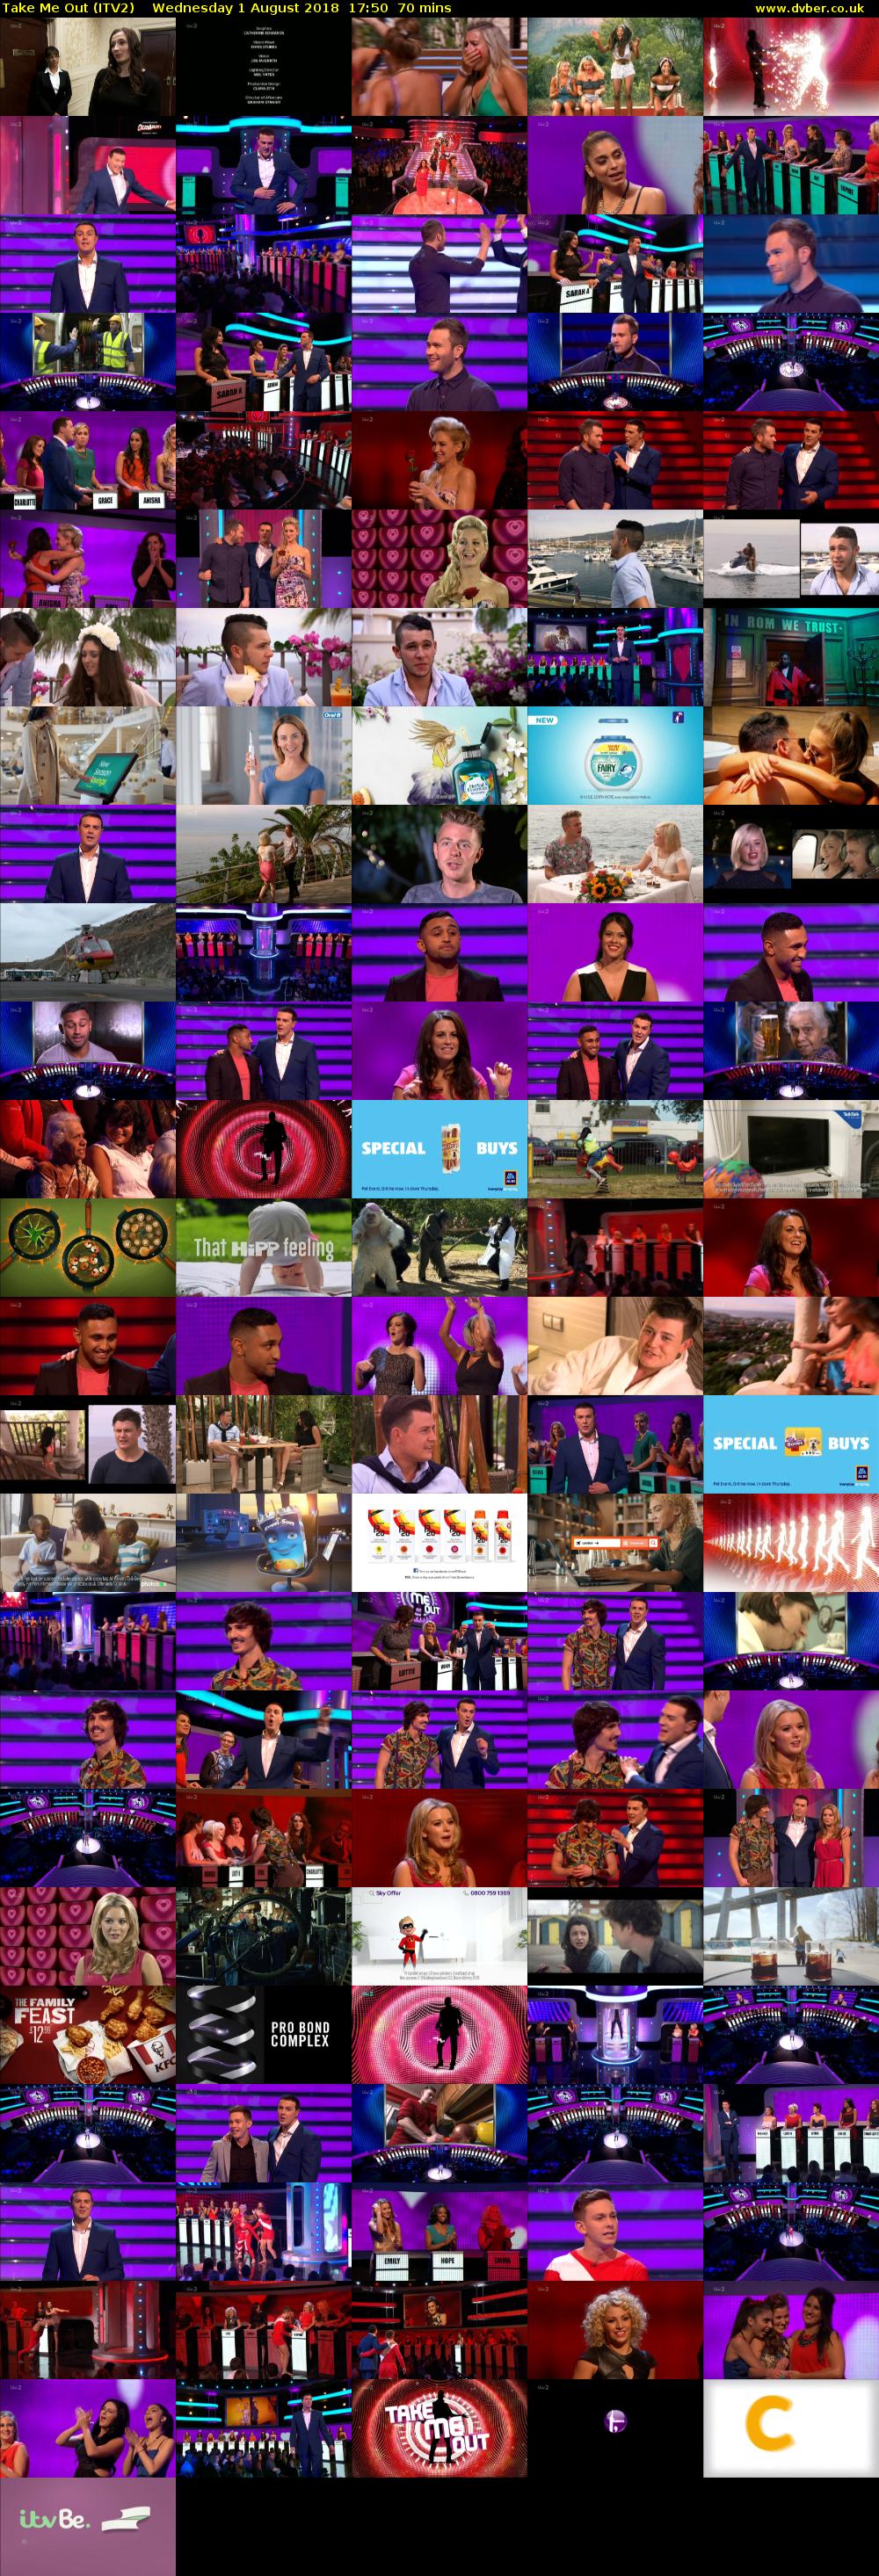 Take Me Out (ITV2) Wednesday 1 August 2018 17:50 - 19:00